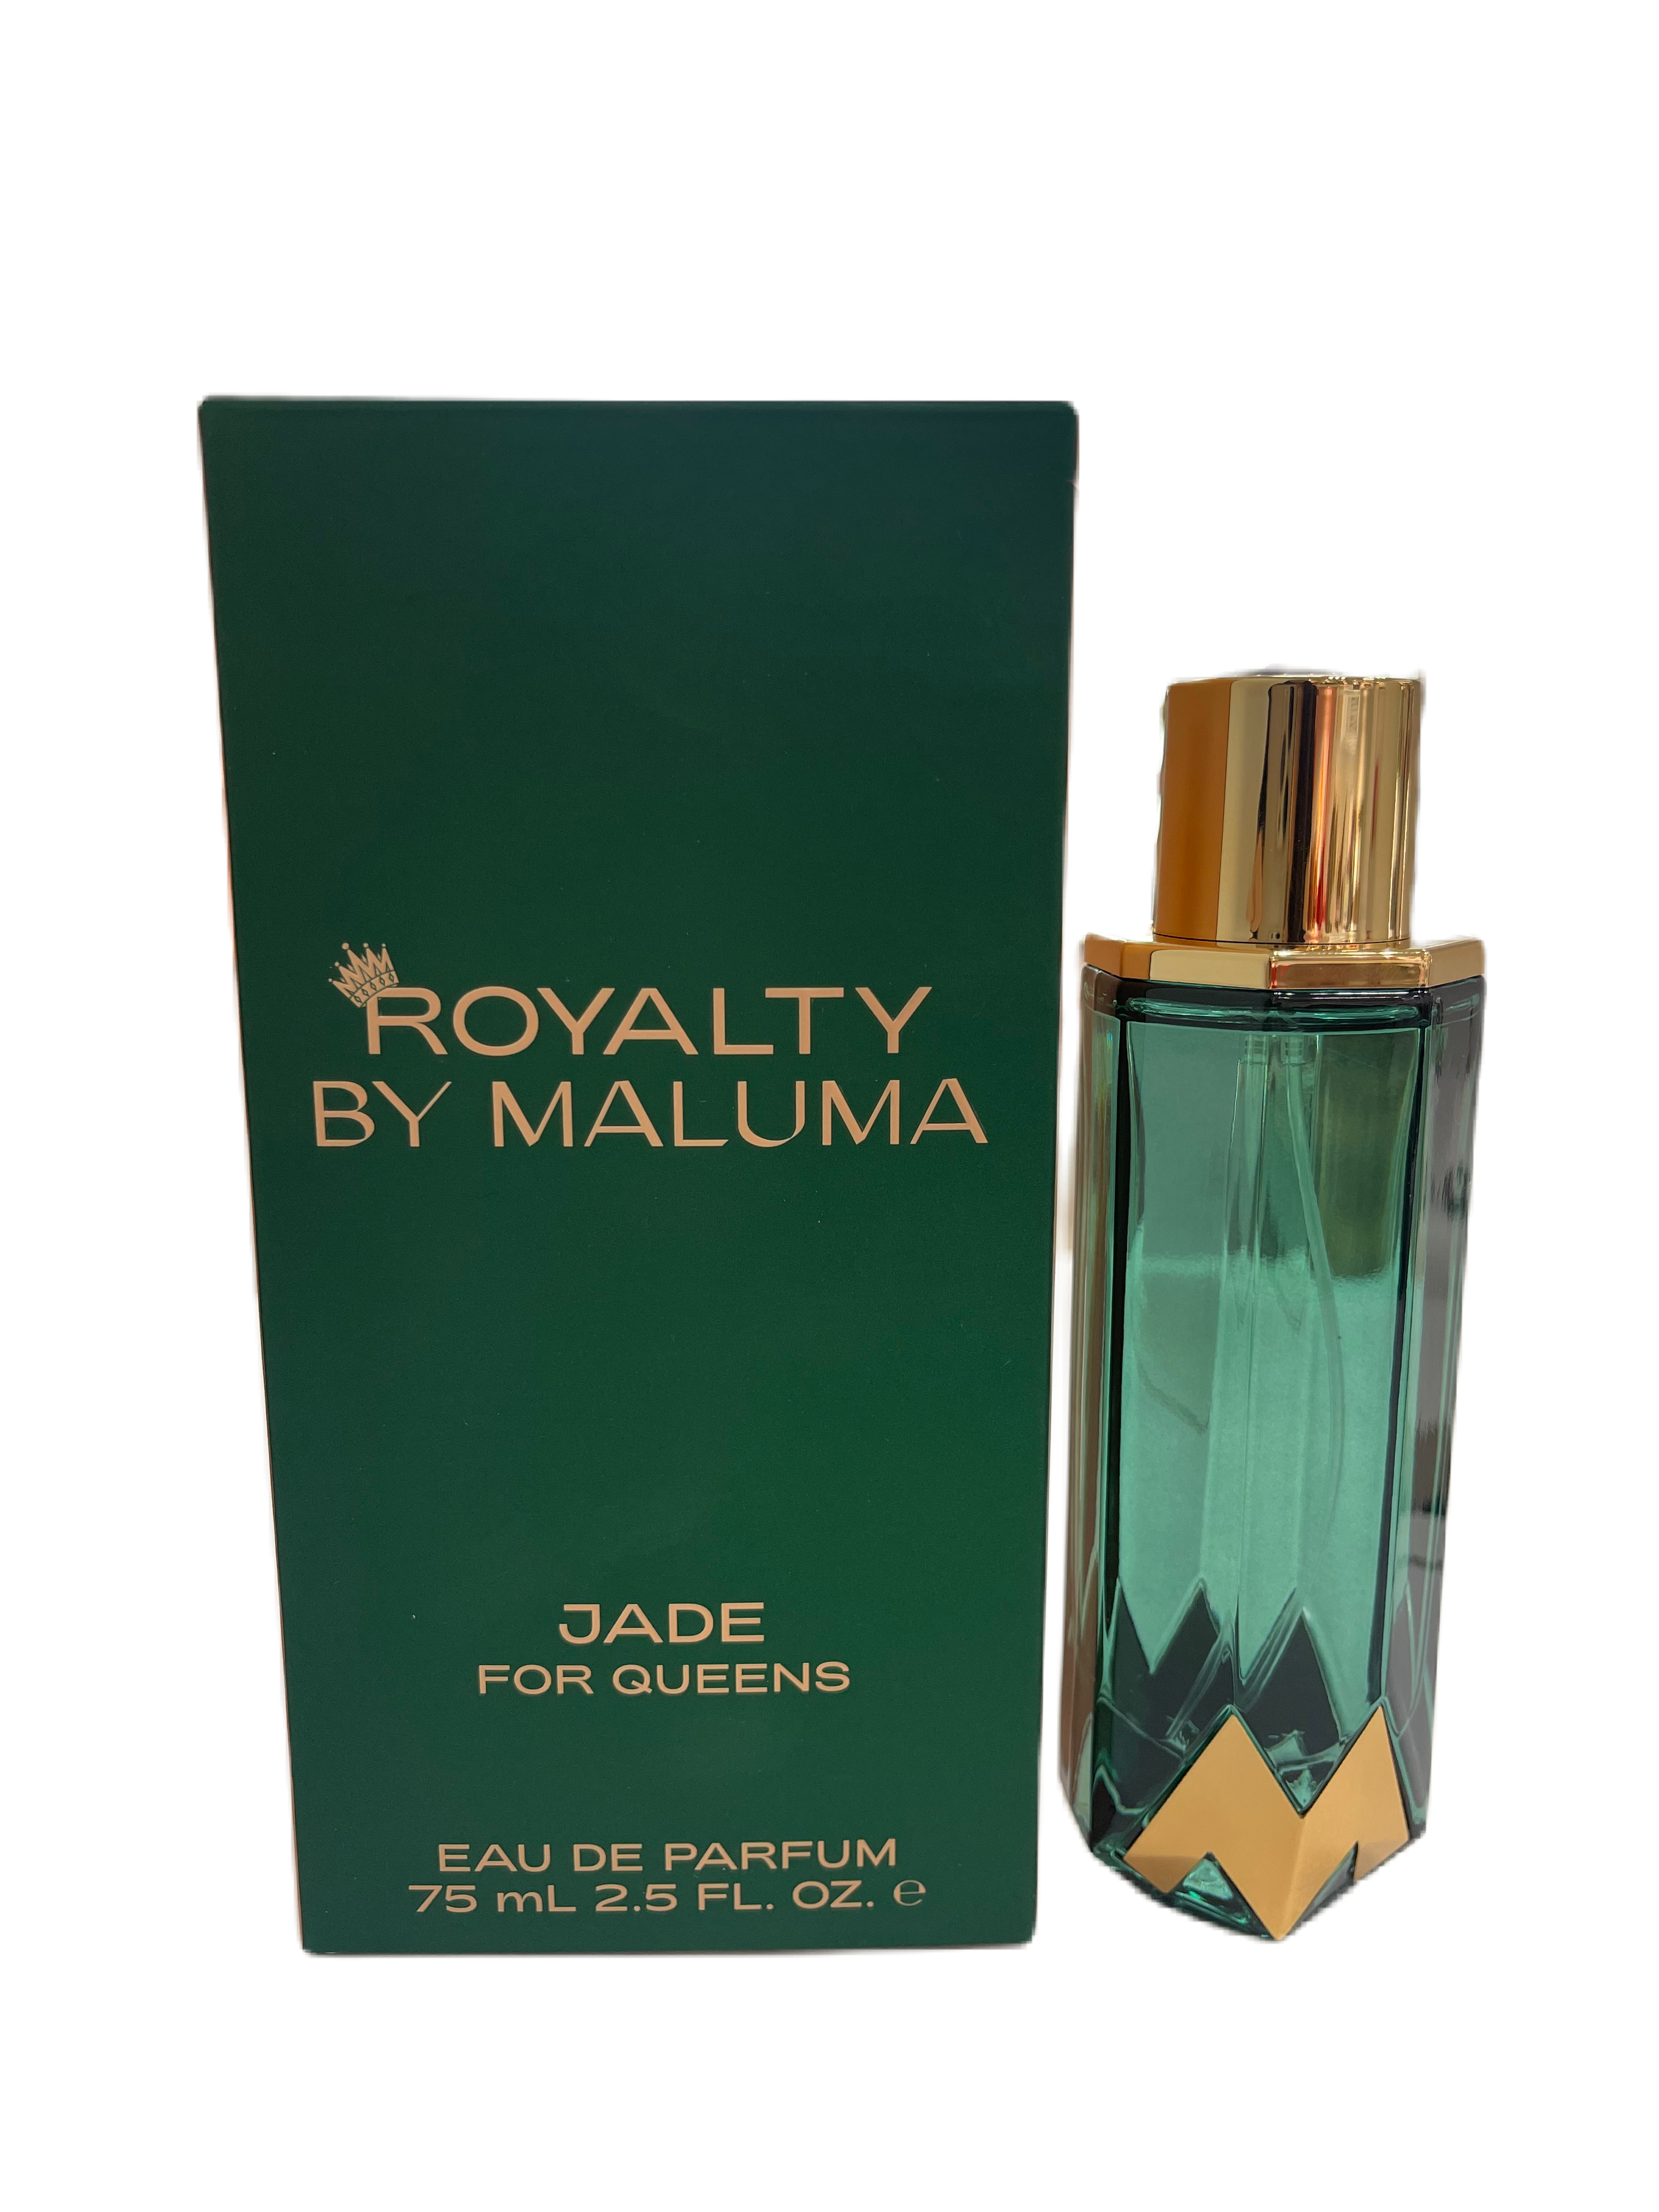 ROYALTY BY MALUMA JADE FOR QUEENS